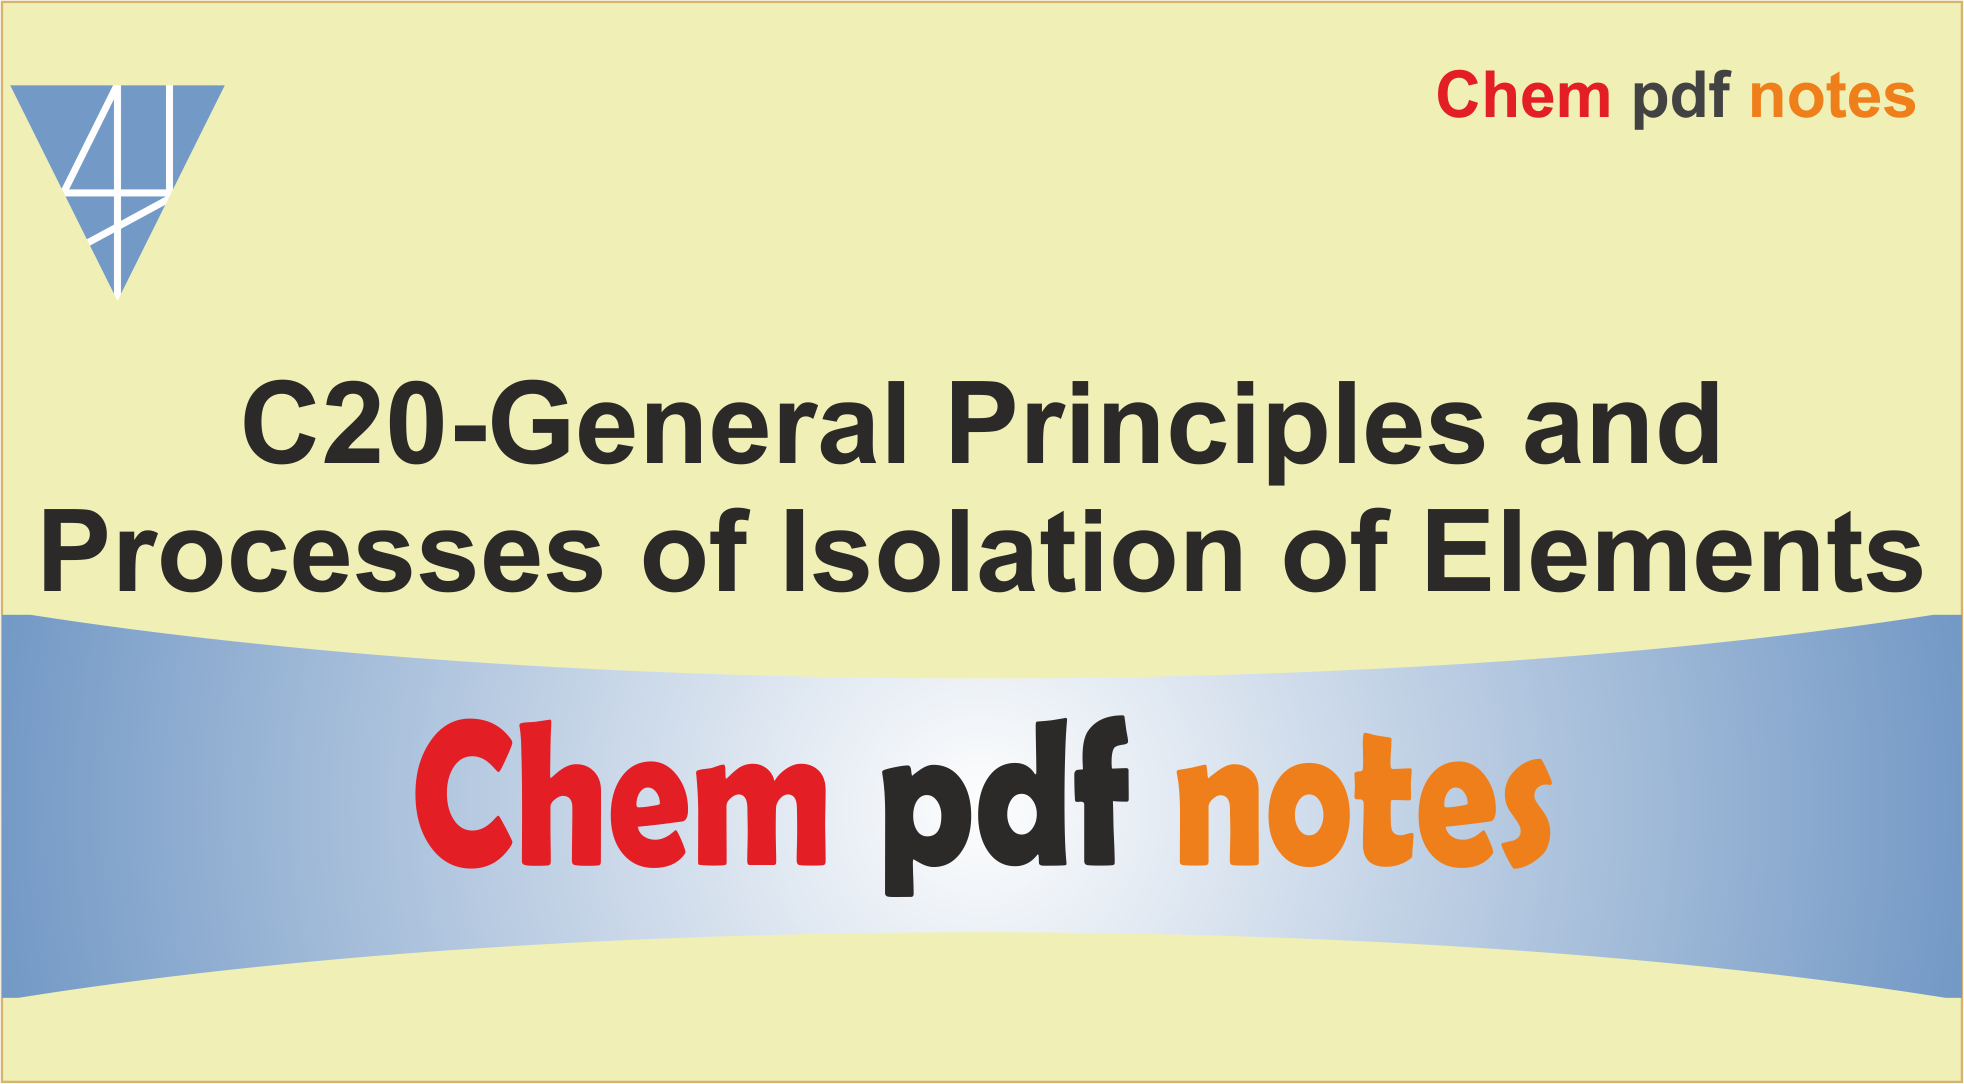 P20-General Principles & Processes of Isolation of Elements